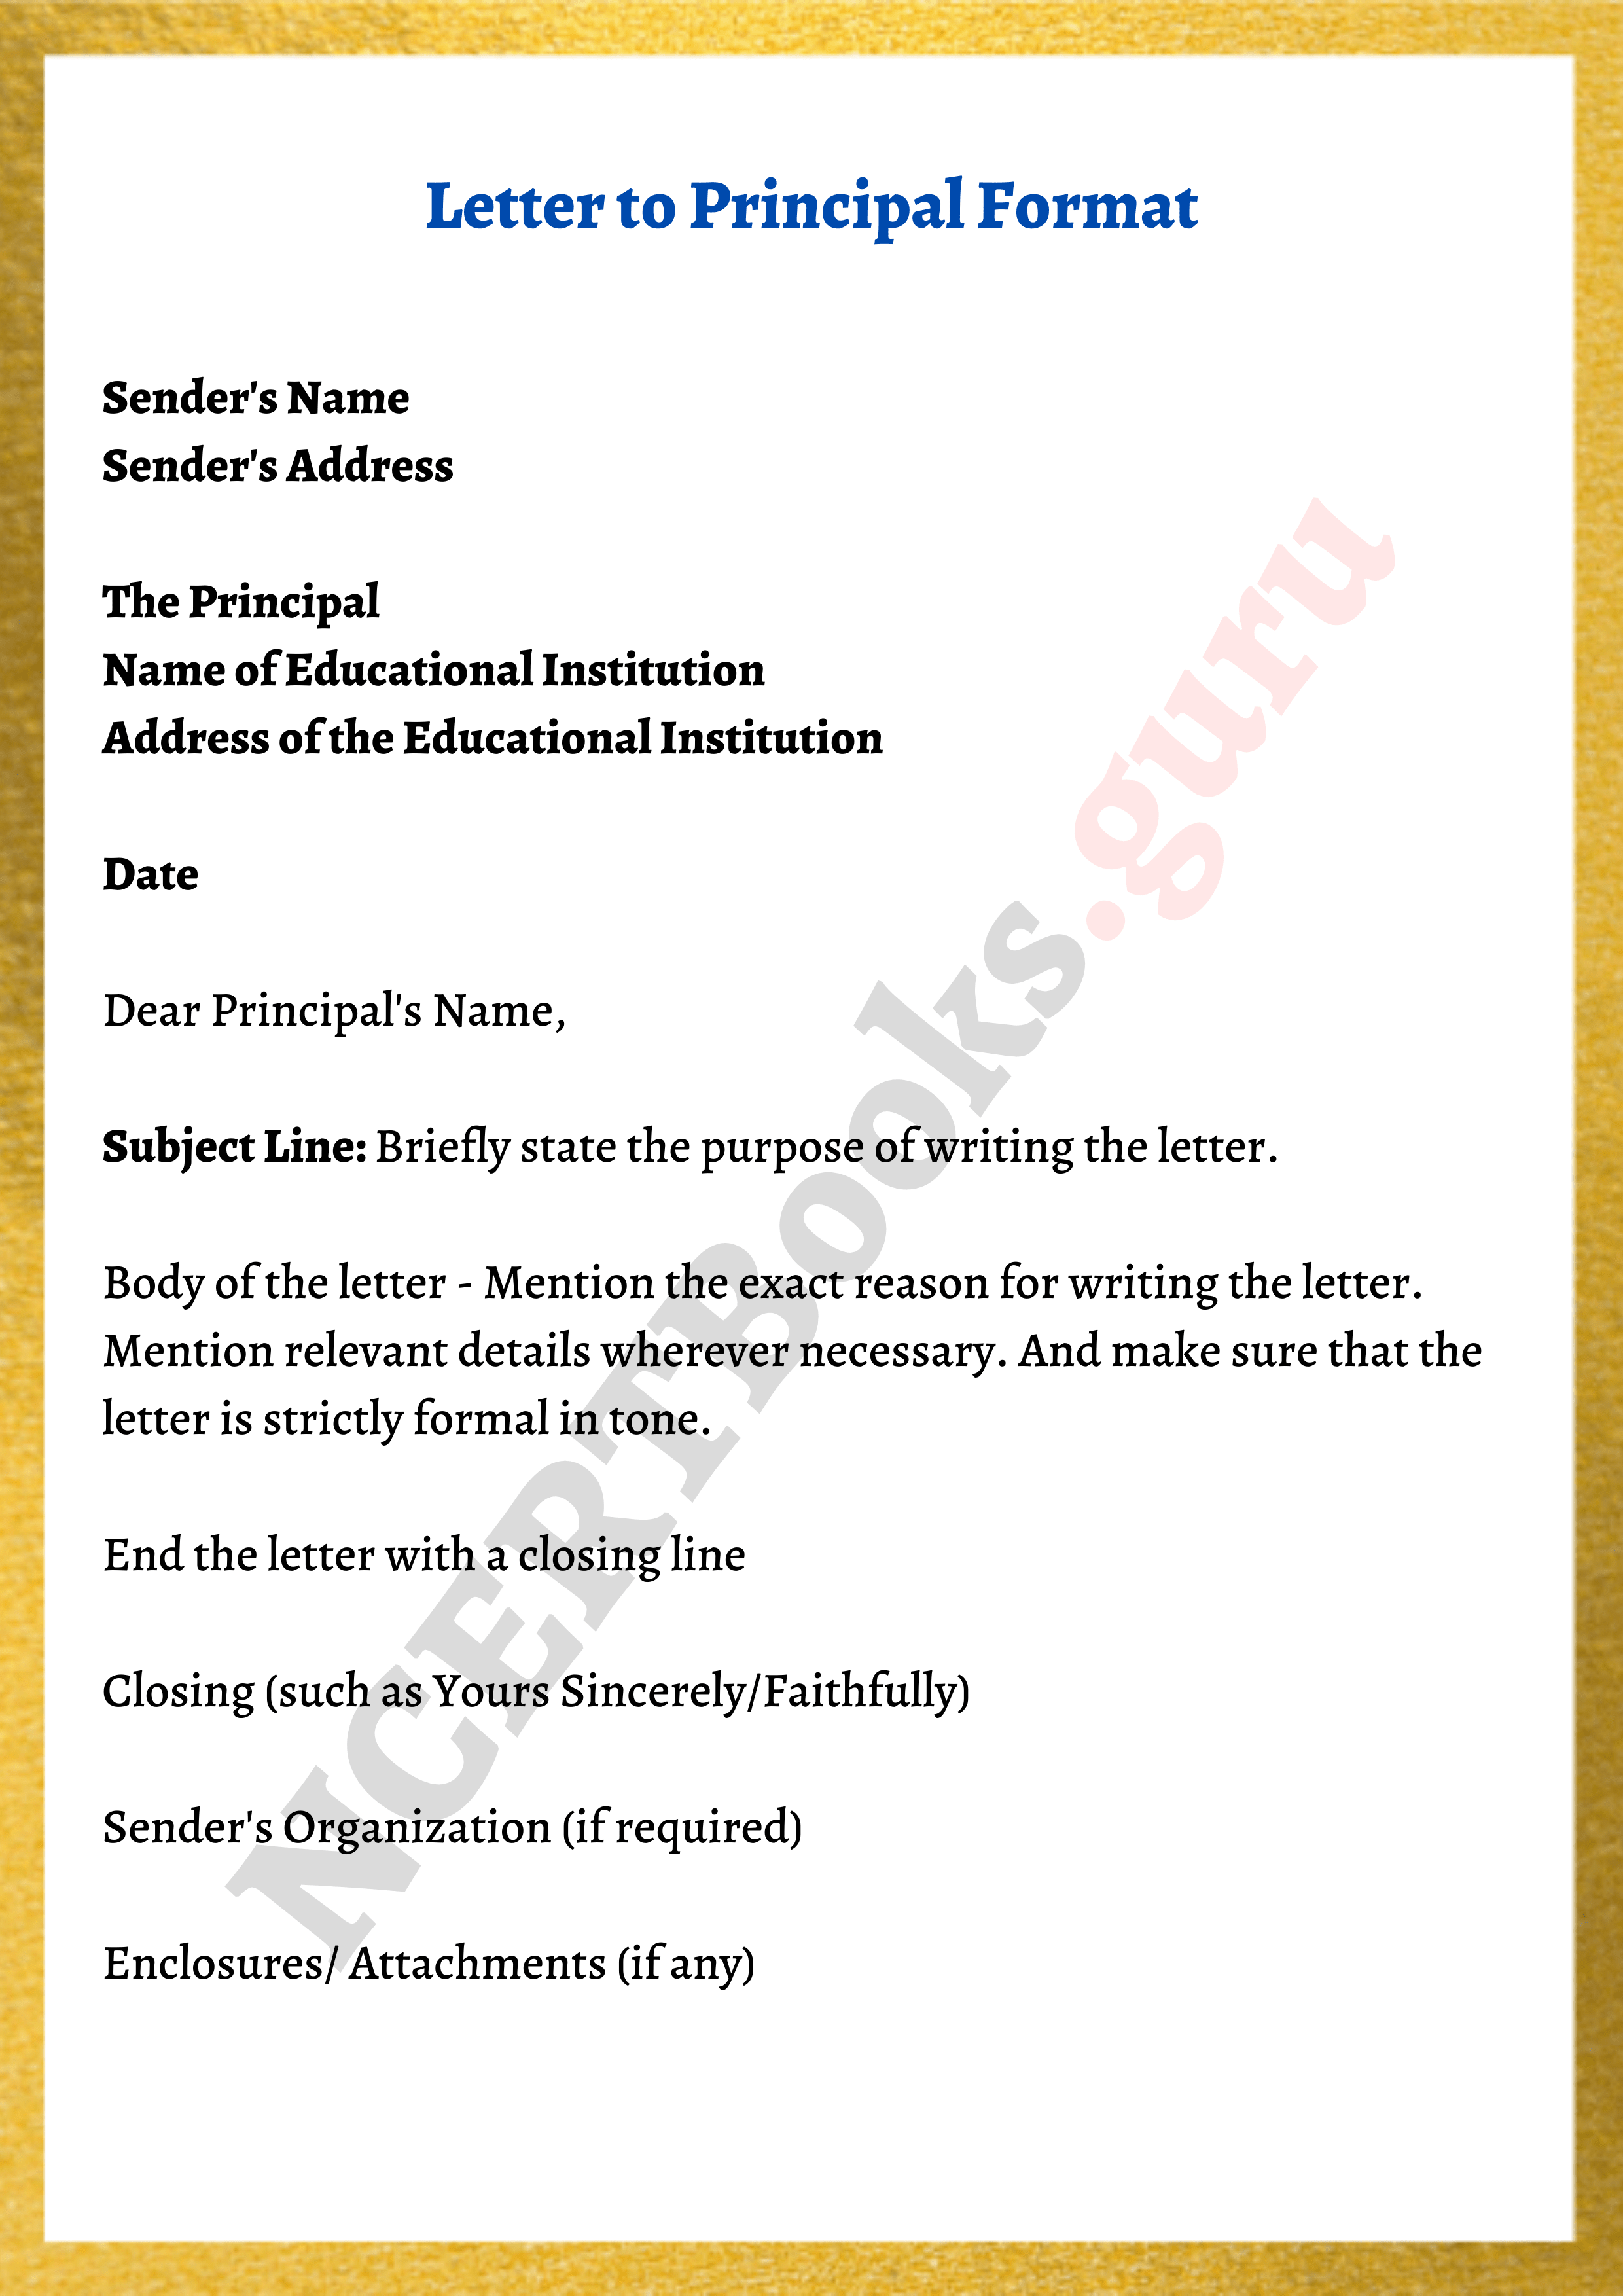 study certificate letter format